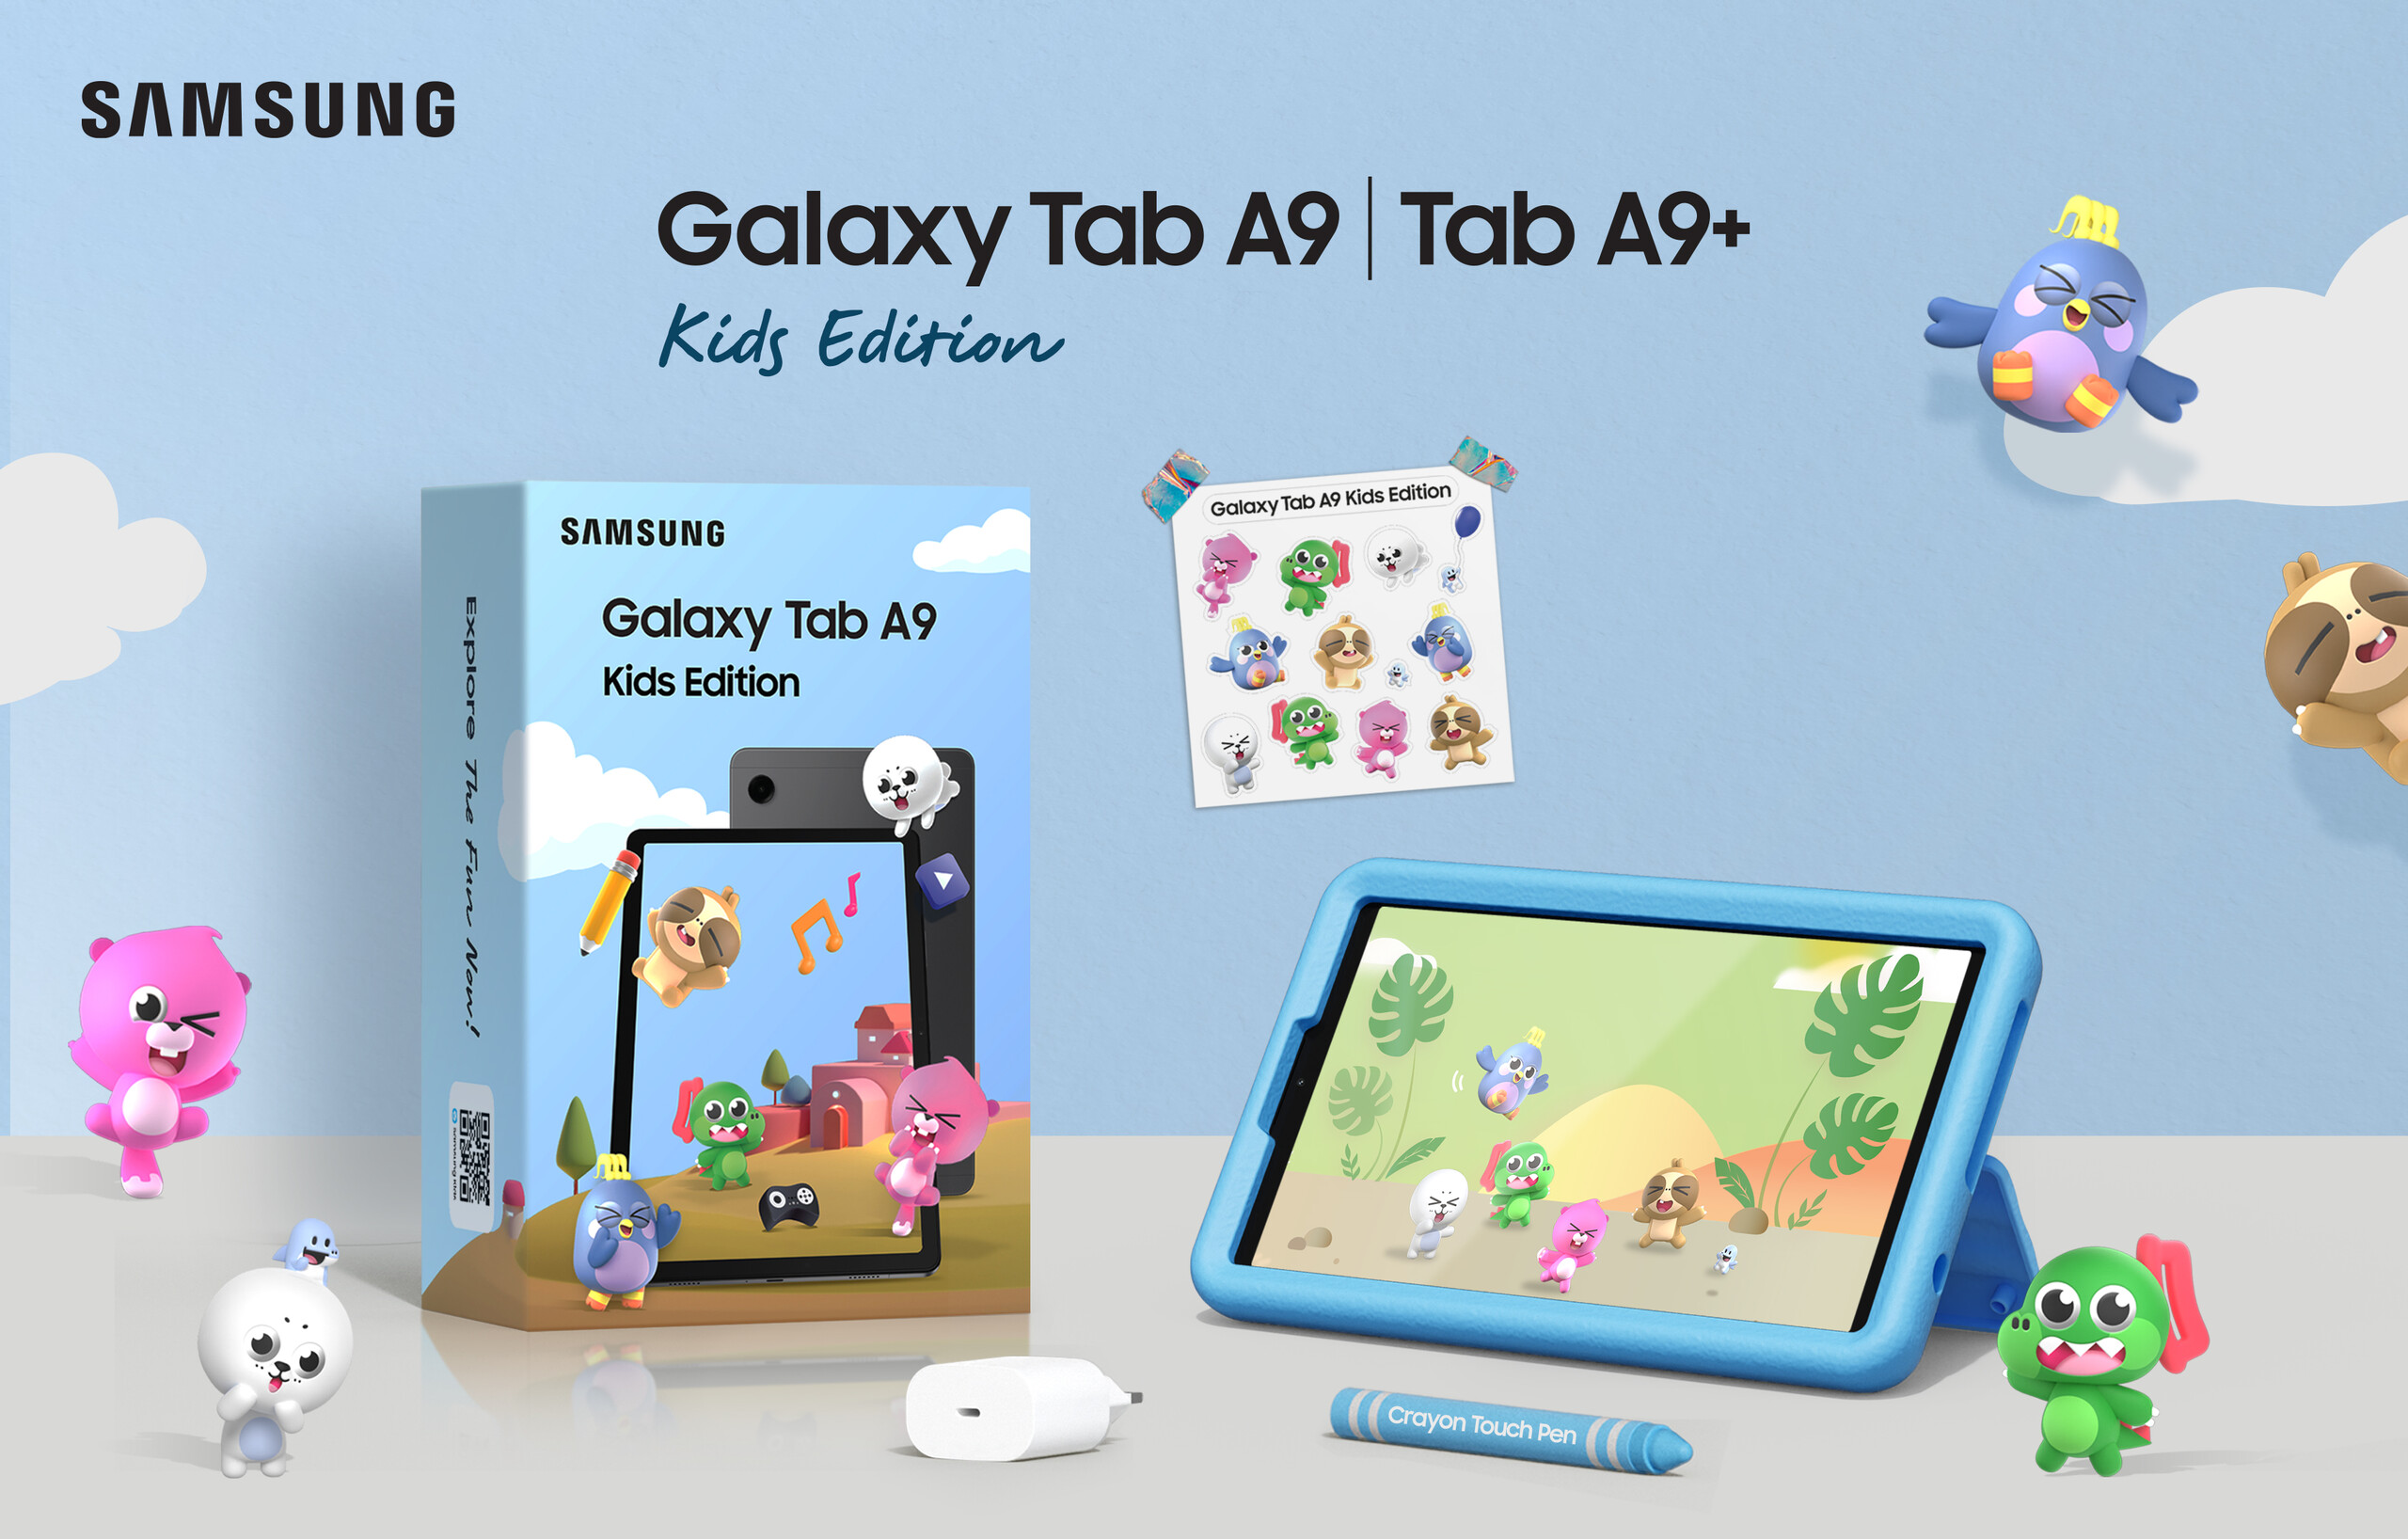 Samsung continues its iPad assault with the new Galaxy Tab A9 series 